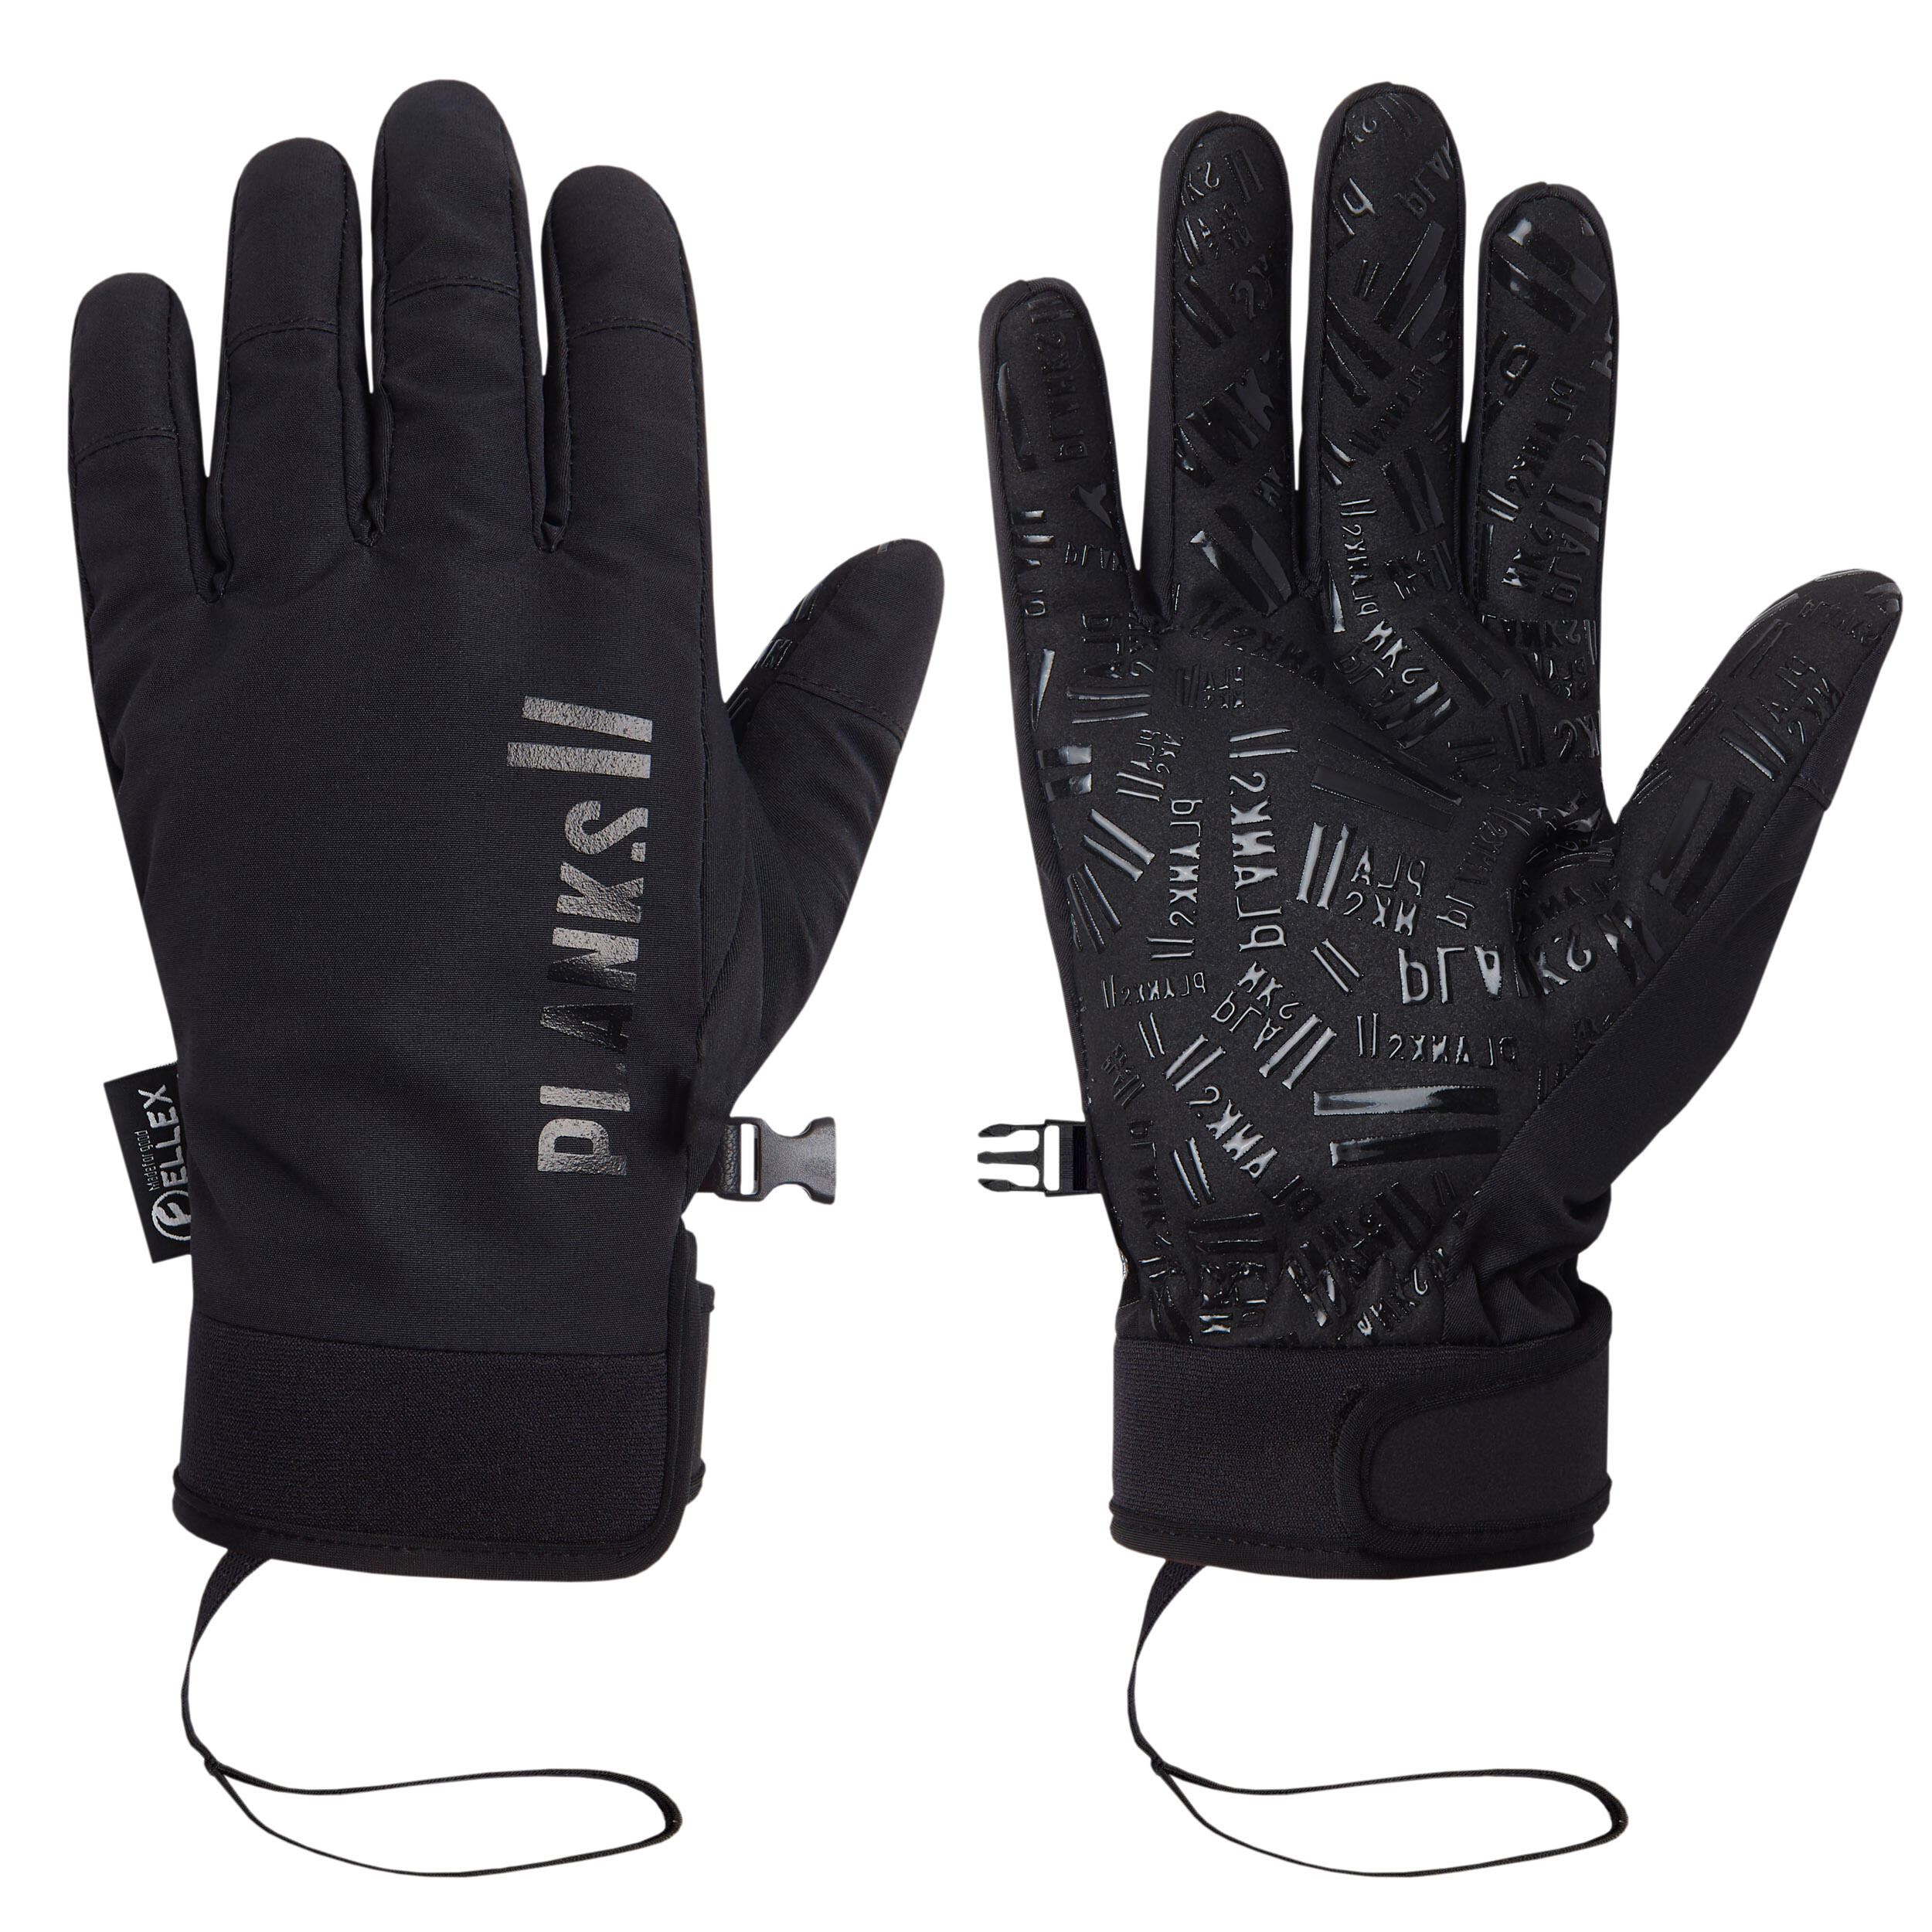 PLANKS Planks High Times Unisex Insulated Pipe Ski Gloves in Black with Print Palm